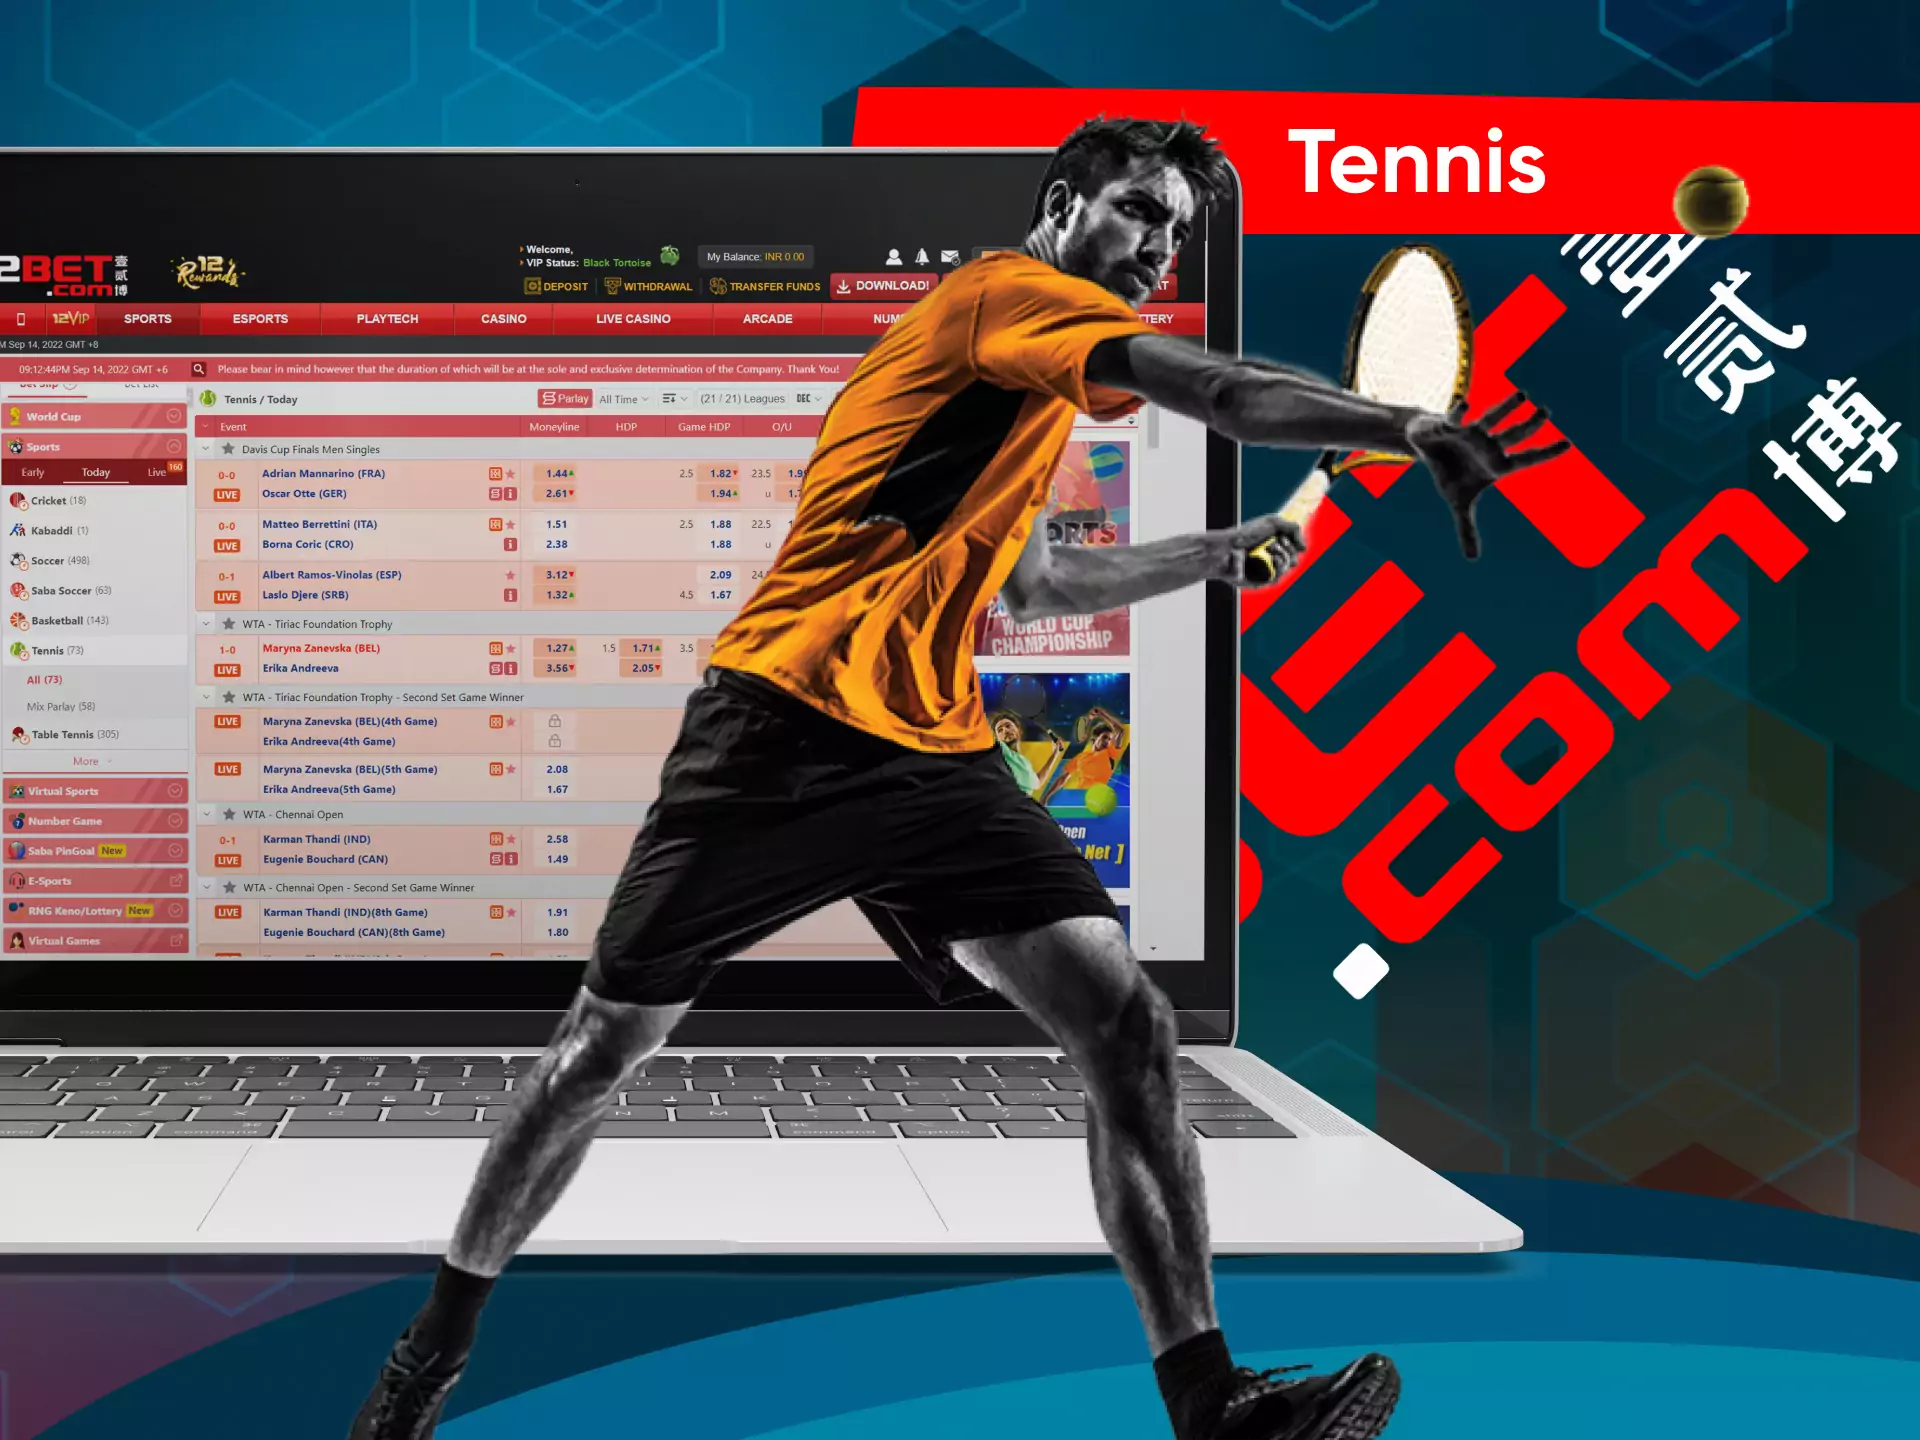 Besides all, there are lots of championships for tennis available for betting on 12bet.